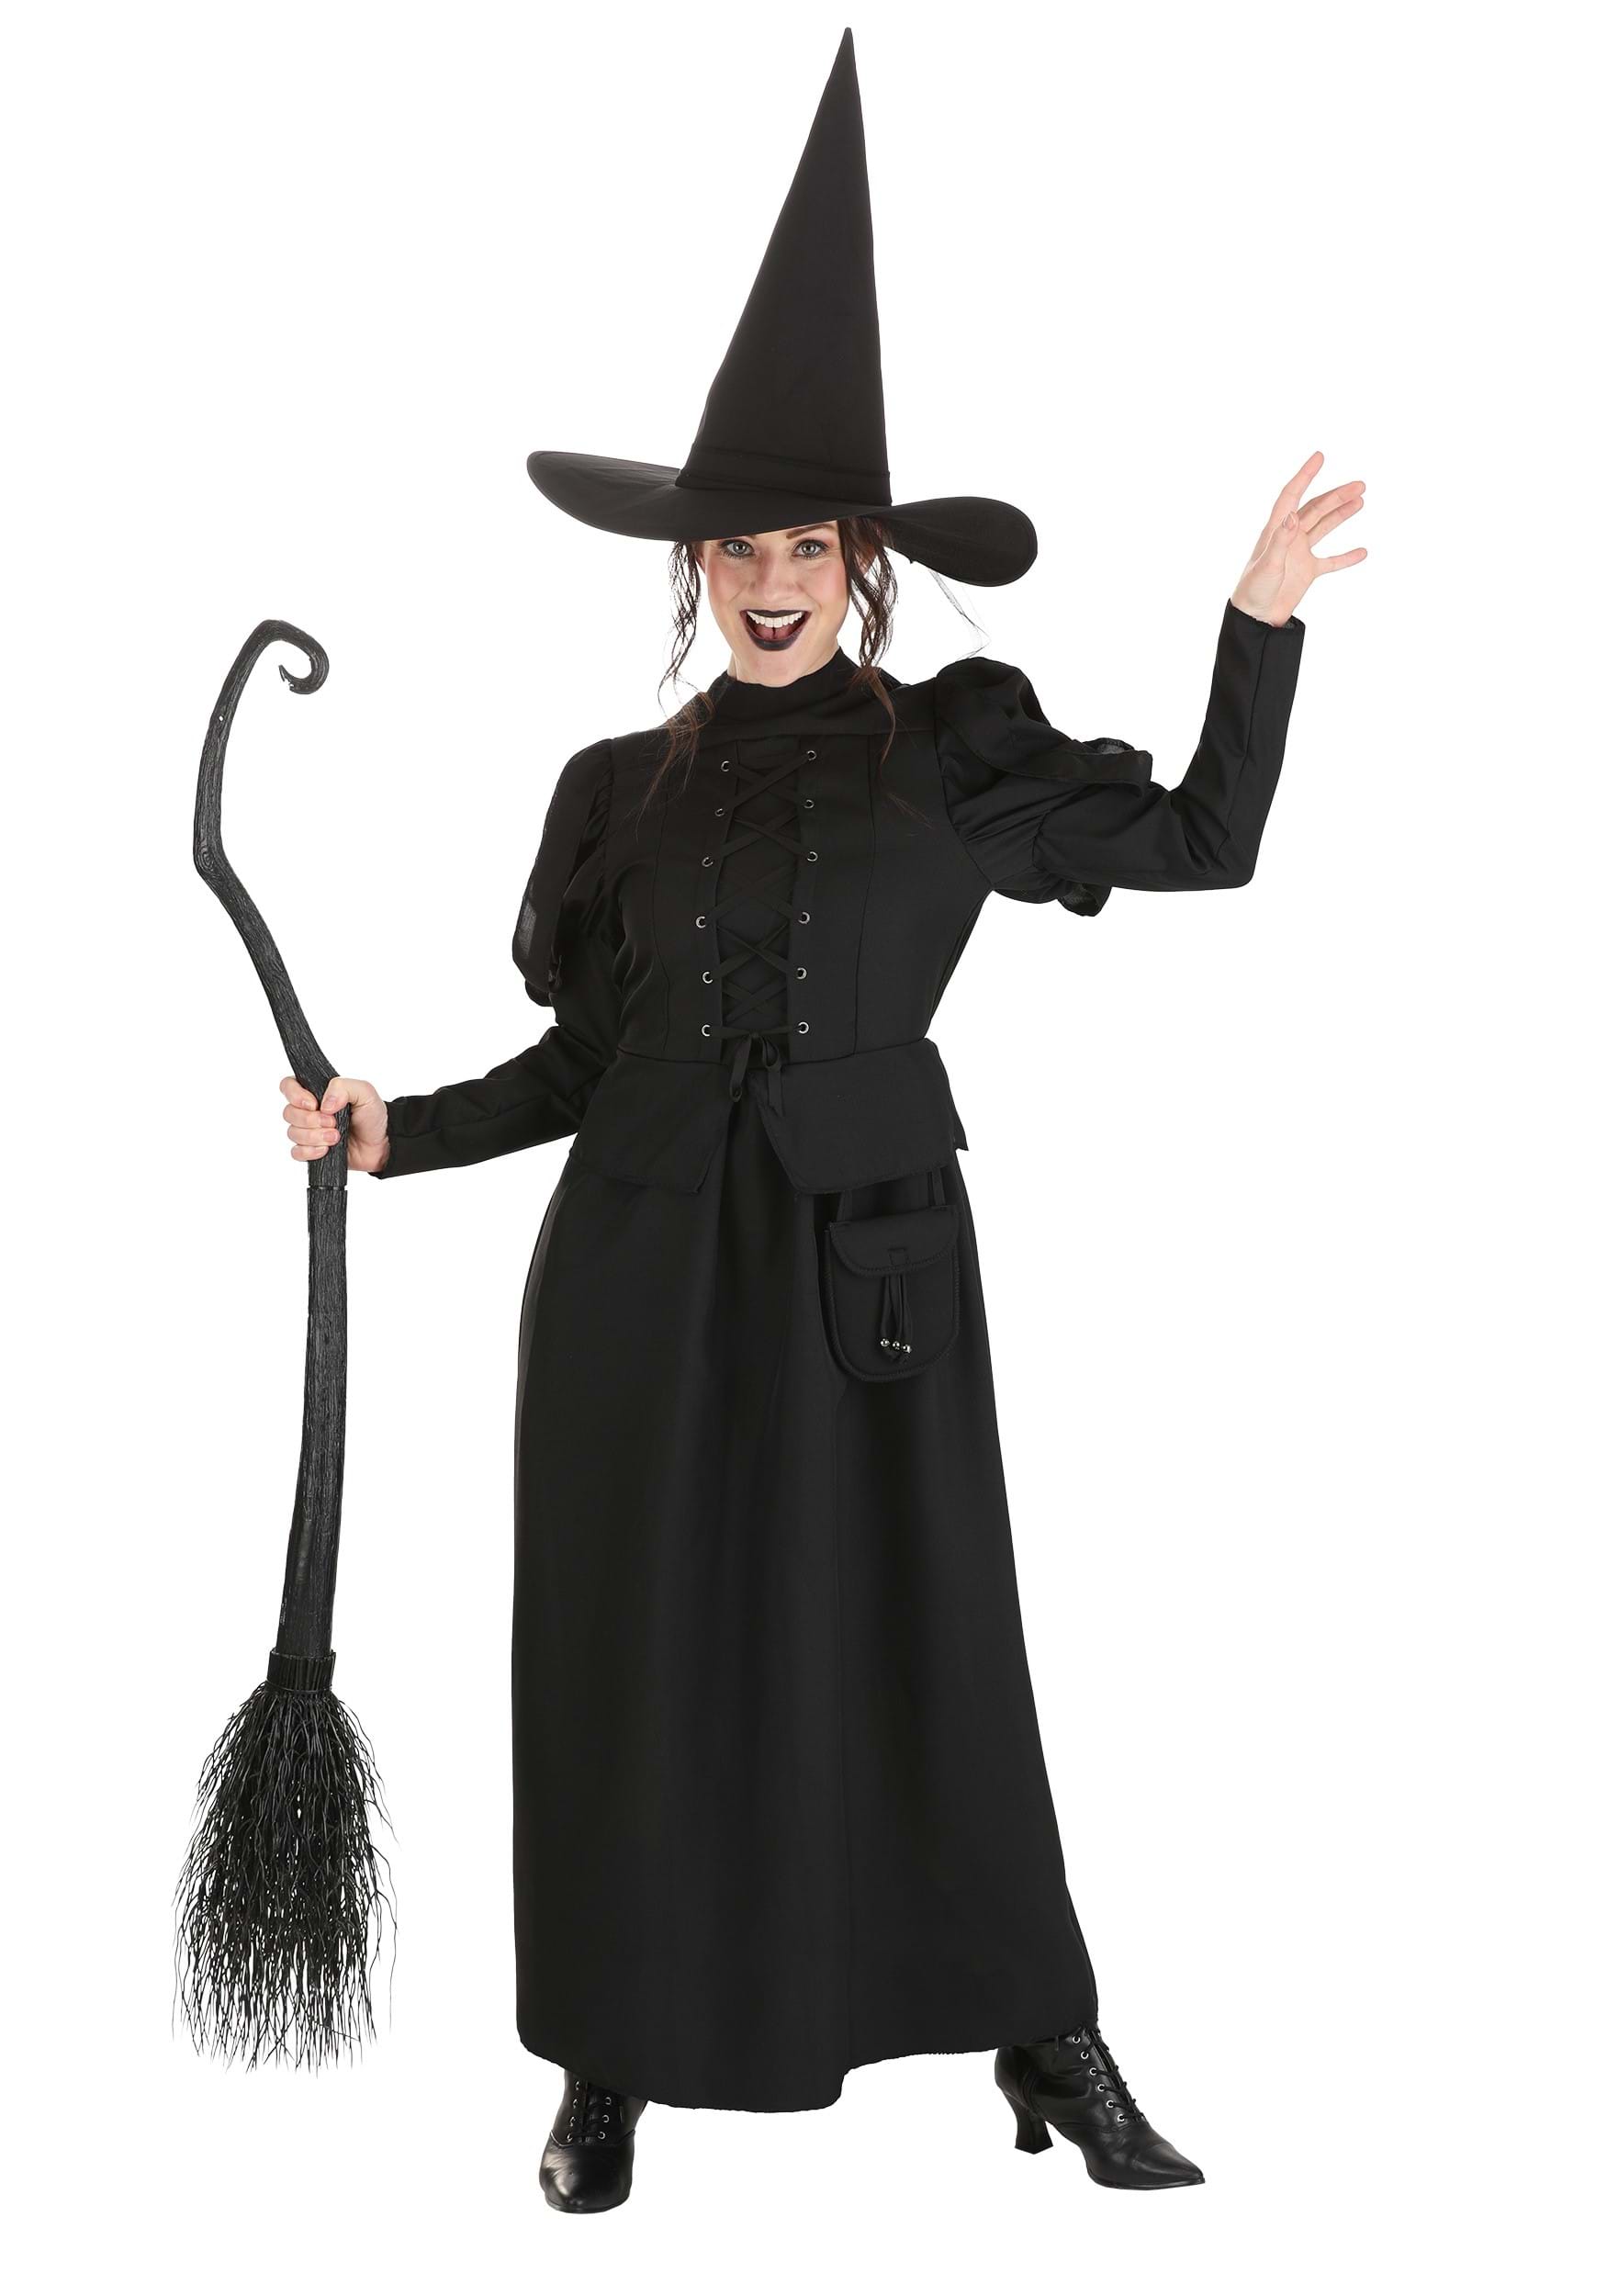 Image of Wizard of Oz Wicked Witch Costume for Women ID JLJLF1040AD-XS